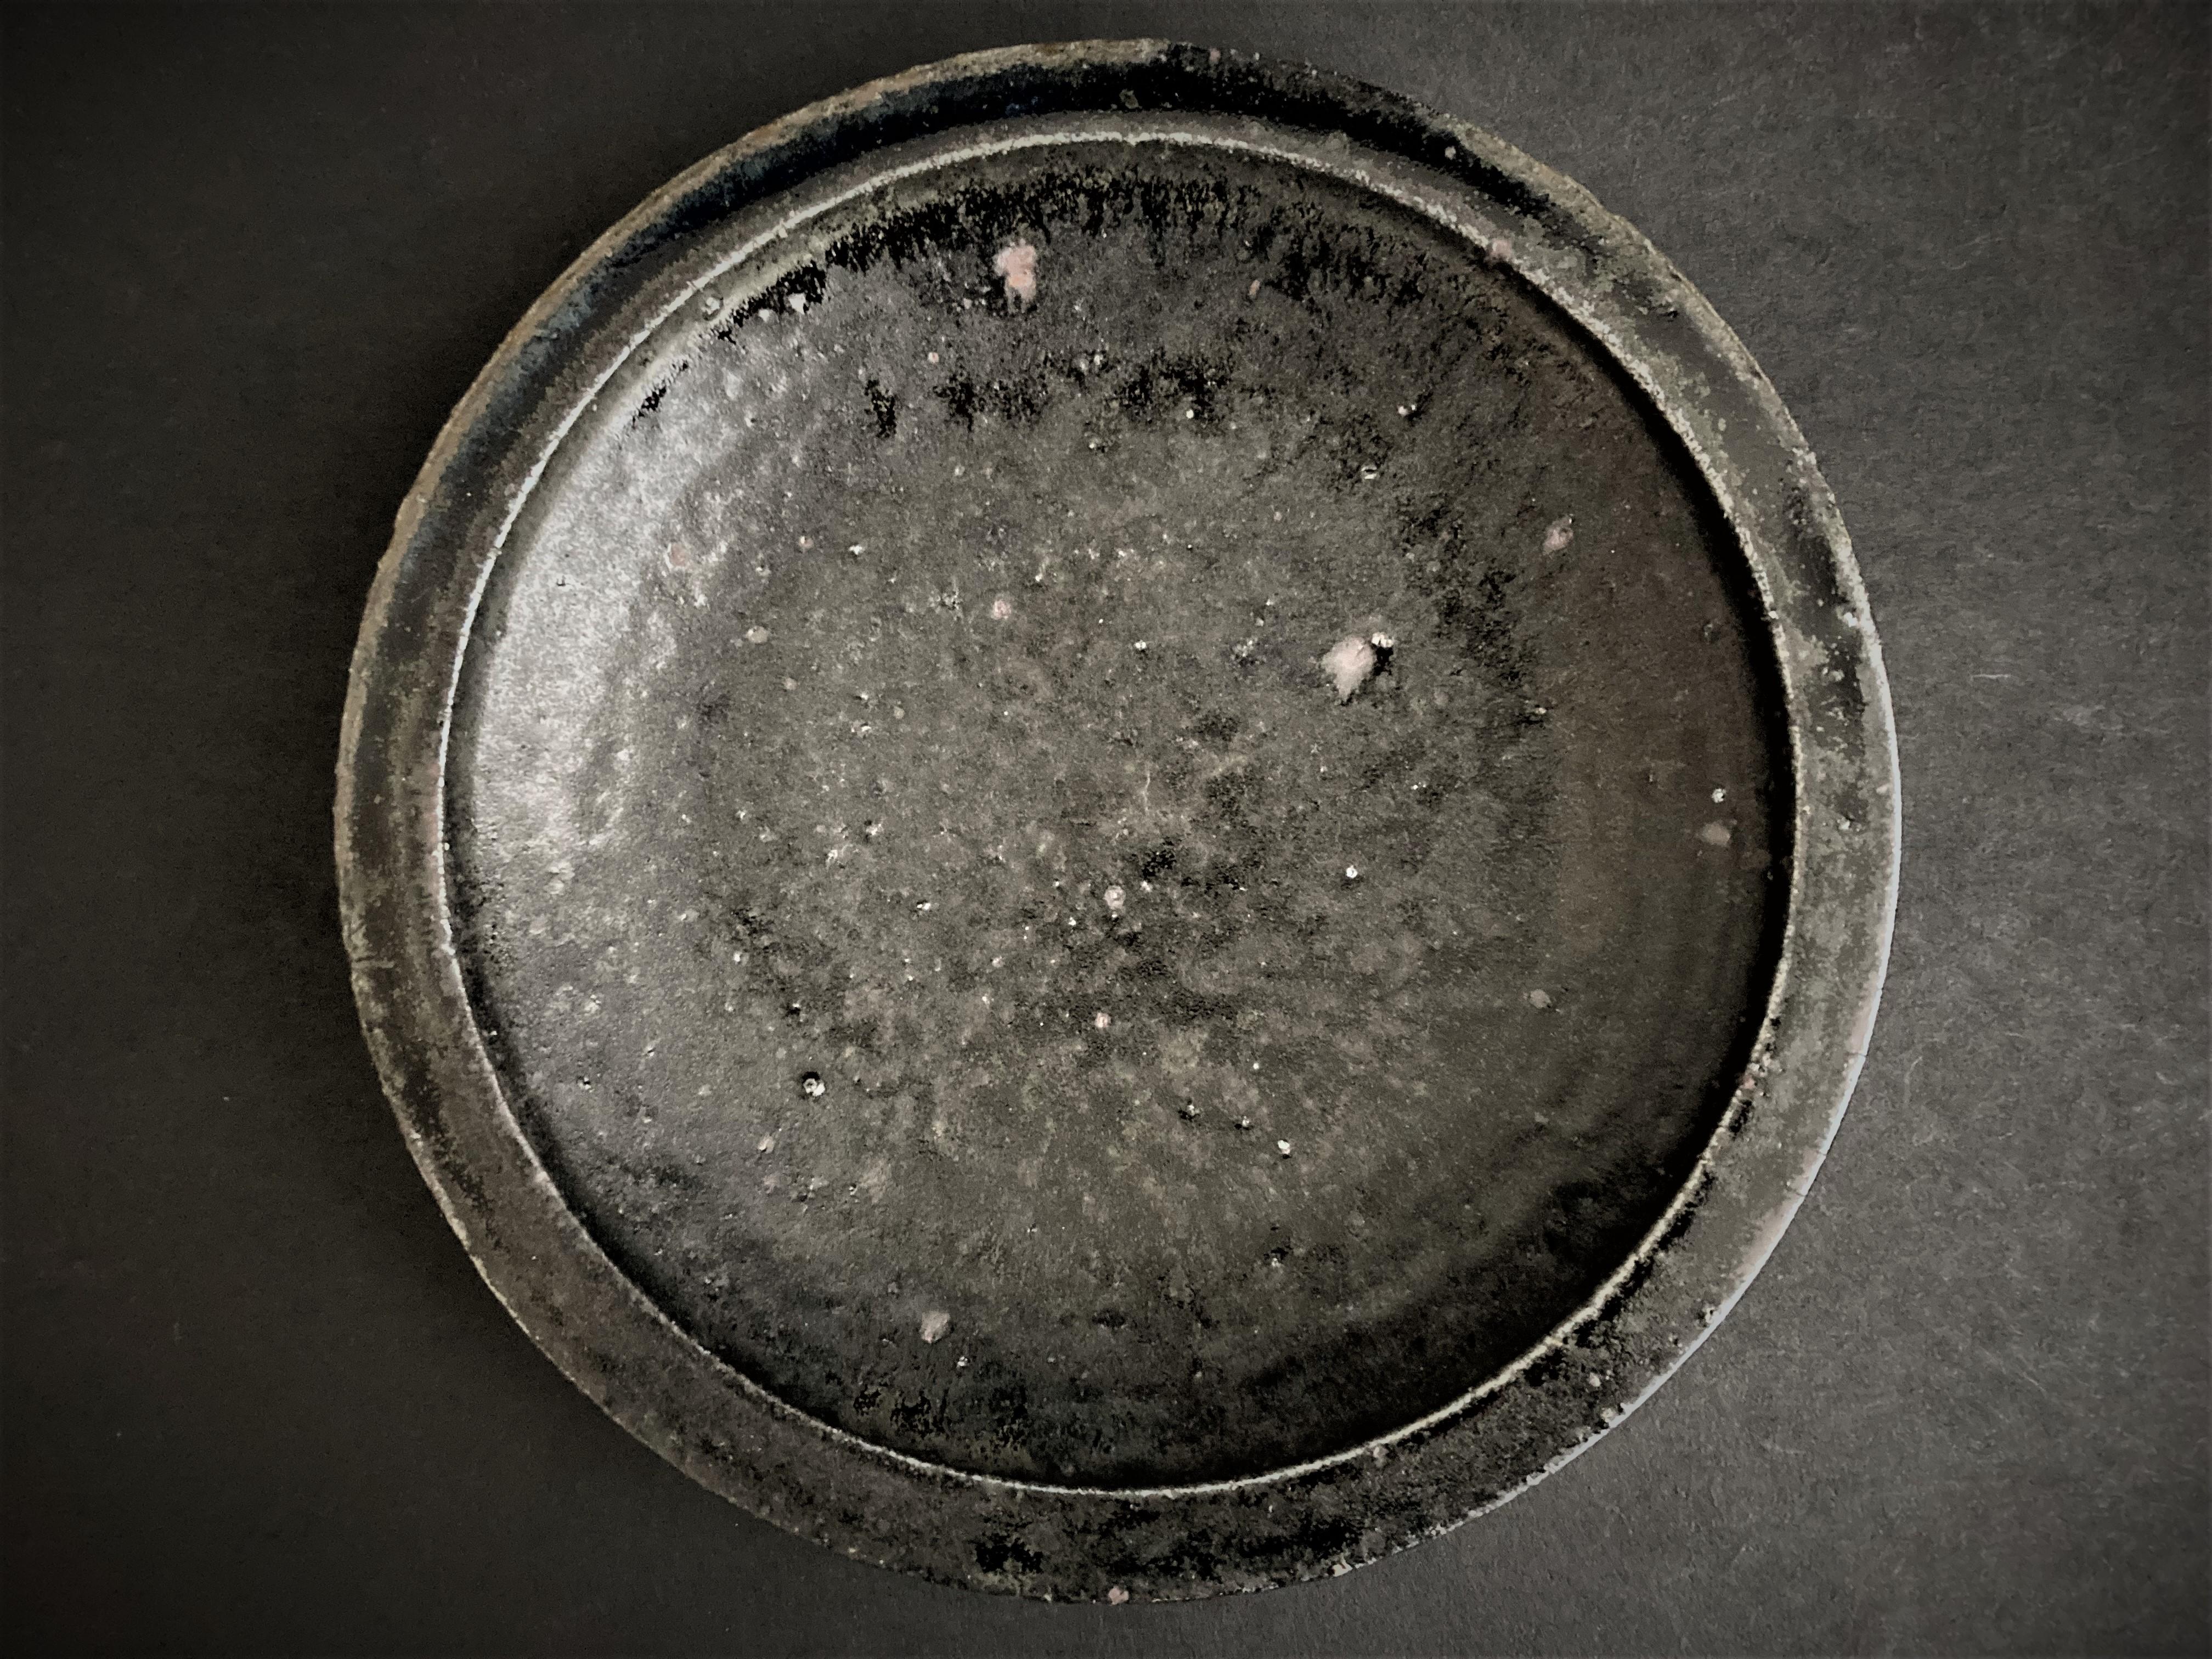 Black large plate by Toru Hatta
Limited Edition of 2
Dimensions: Diameter 32 x H 5.5 cm
Material: Handmade Ceramic. 


Toru Hatta was both in Kanazawa in 1977. His love of antiques and old wares lends influence to his ancient and